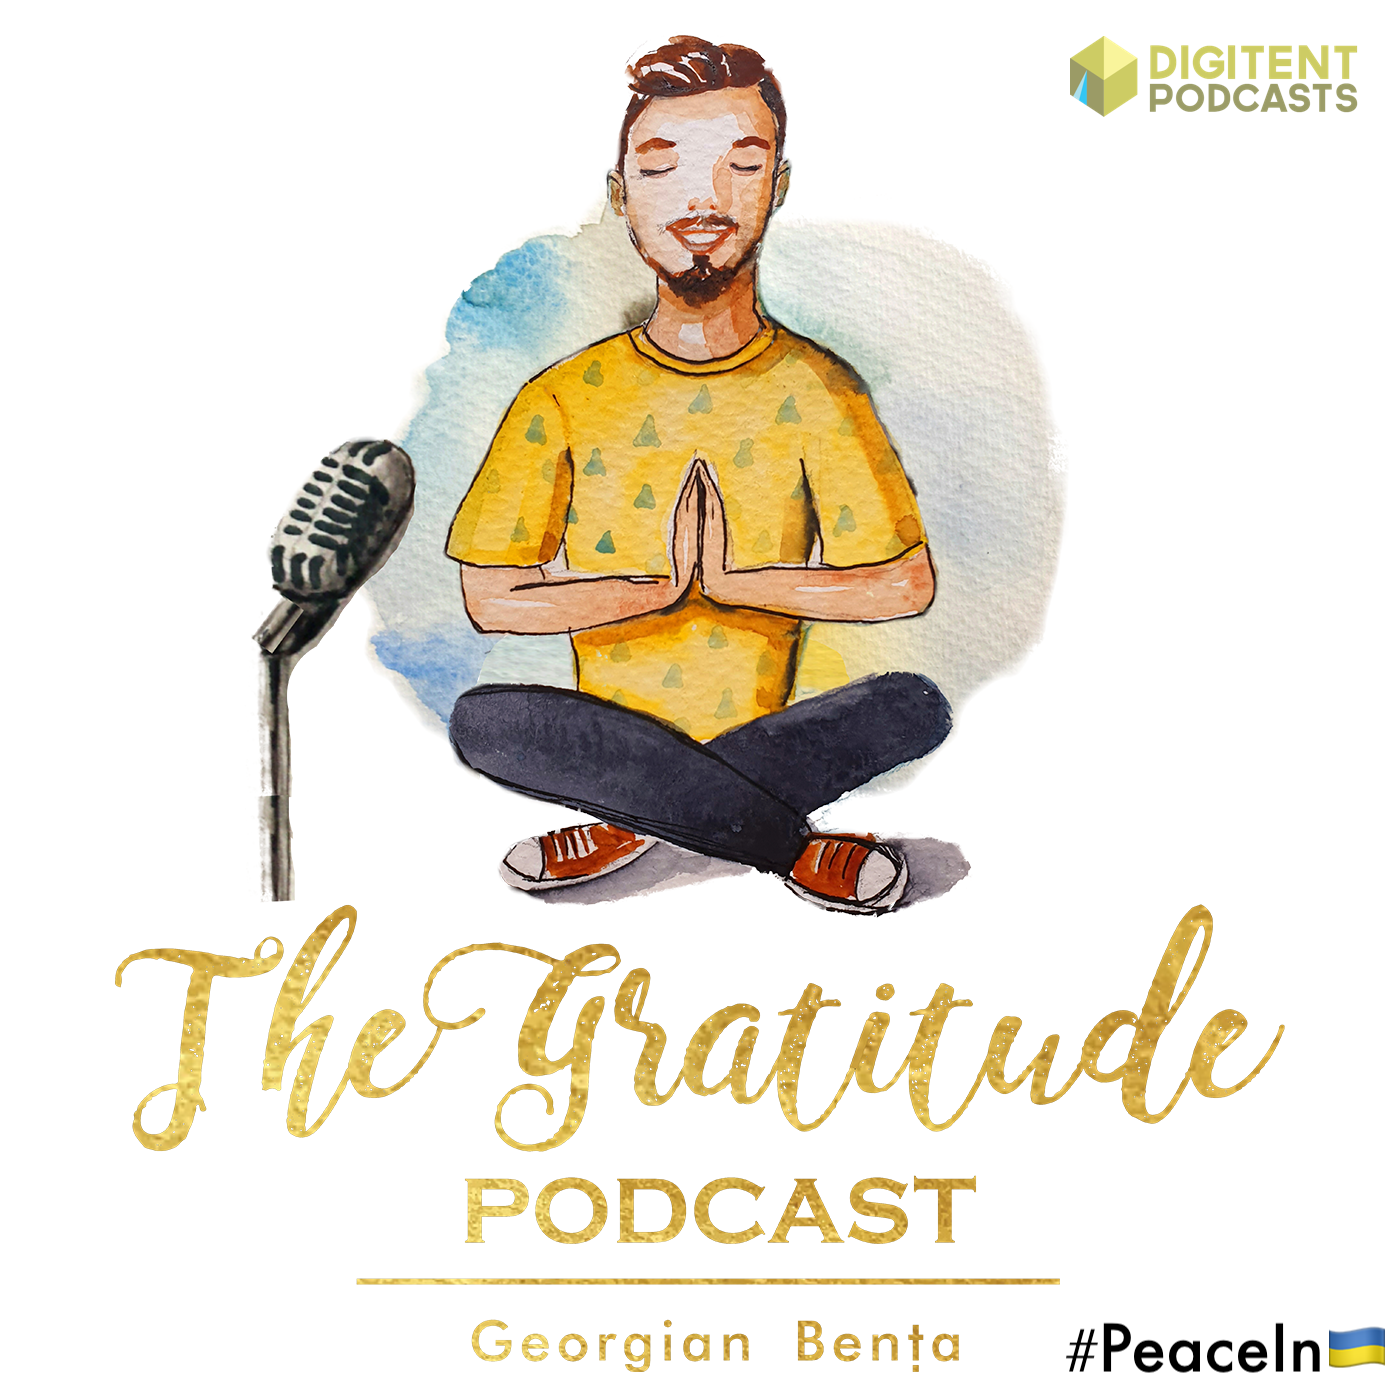 Nothing To Be Grateful For... - Carlyn Montes De Oca (ep. 842)